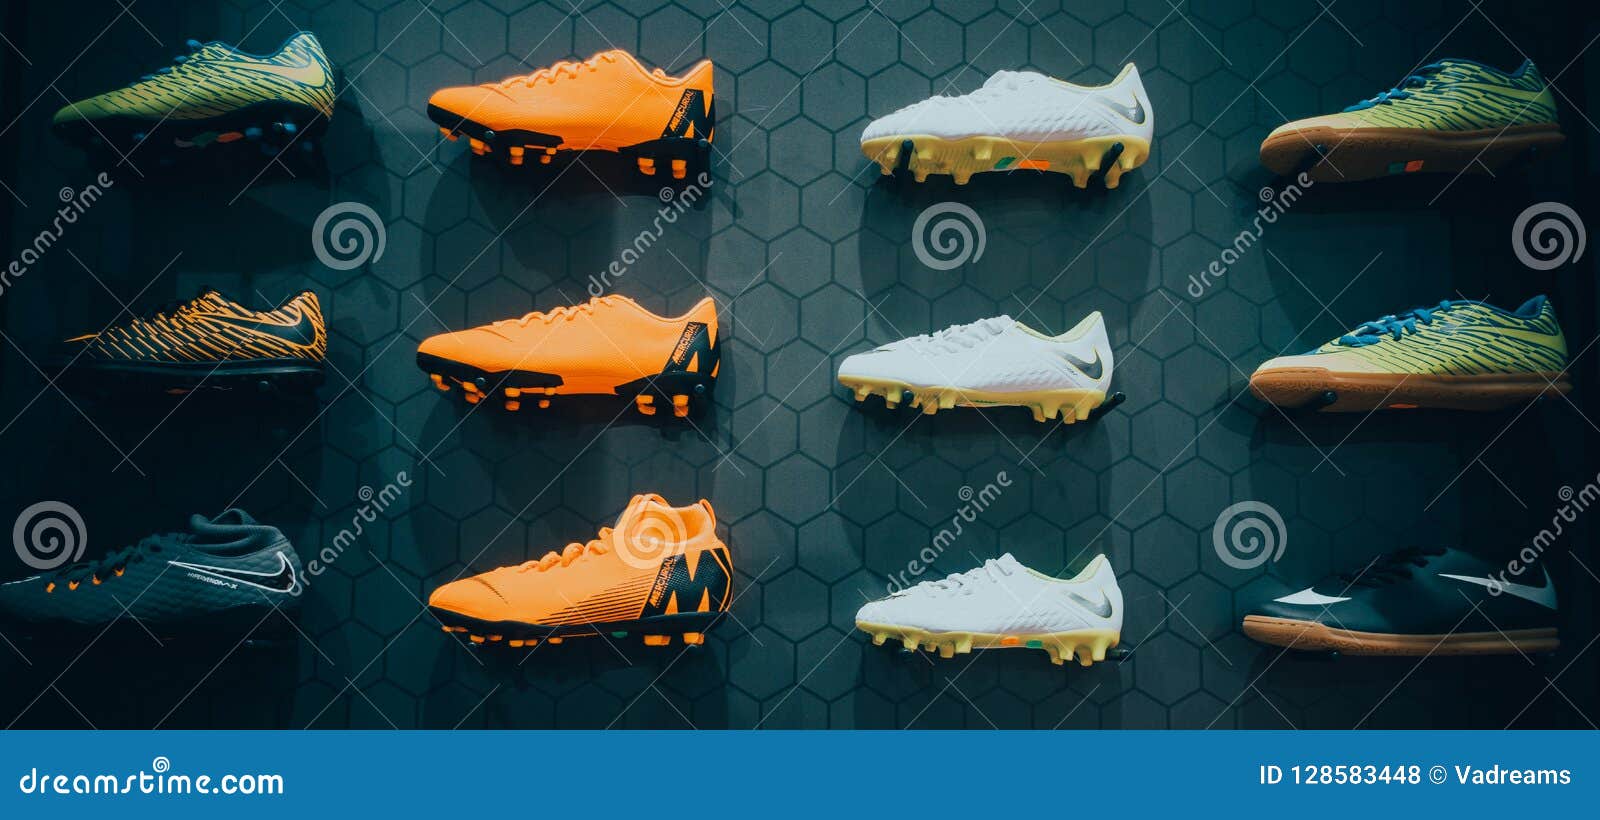 Vilnius, Lithuania - August 30, 2018: Nike Football Boots Displayed on Black Background in Sport Store Editorial Stock - Image of activity, retail: 128583448